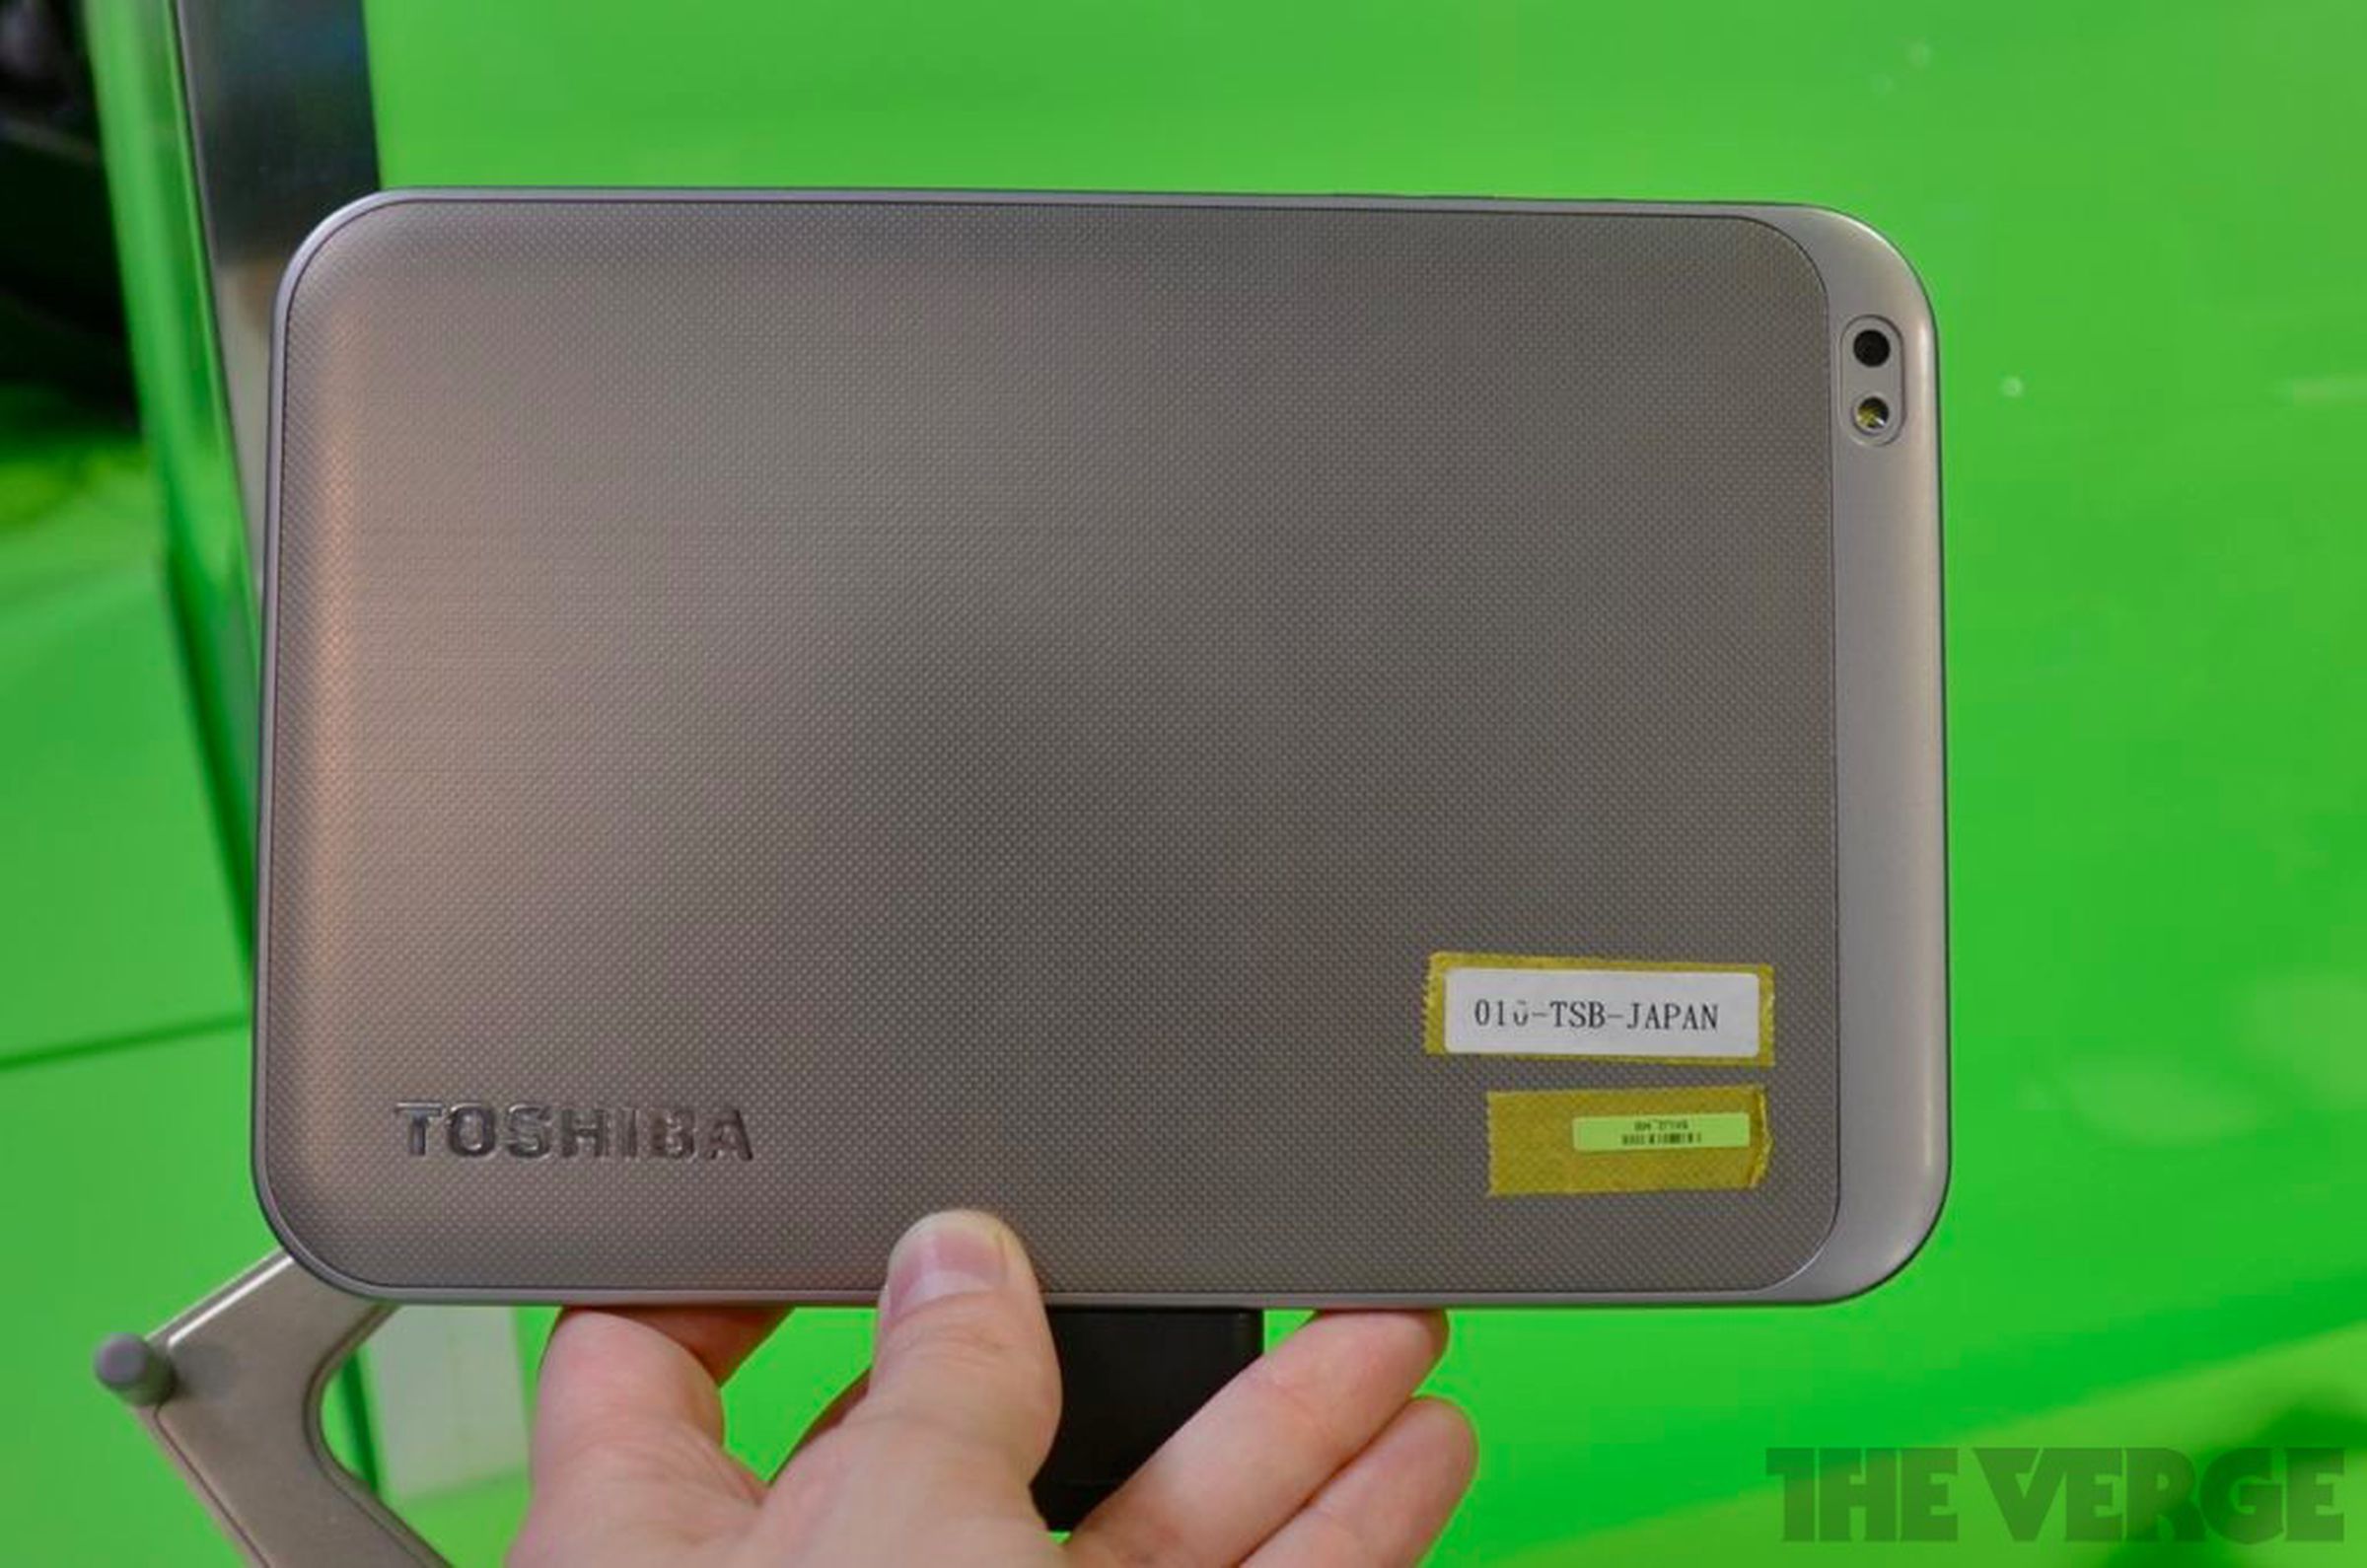 Toshiba 7.7-inch tablet hands on photos